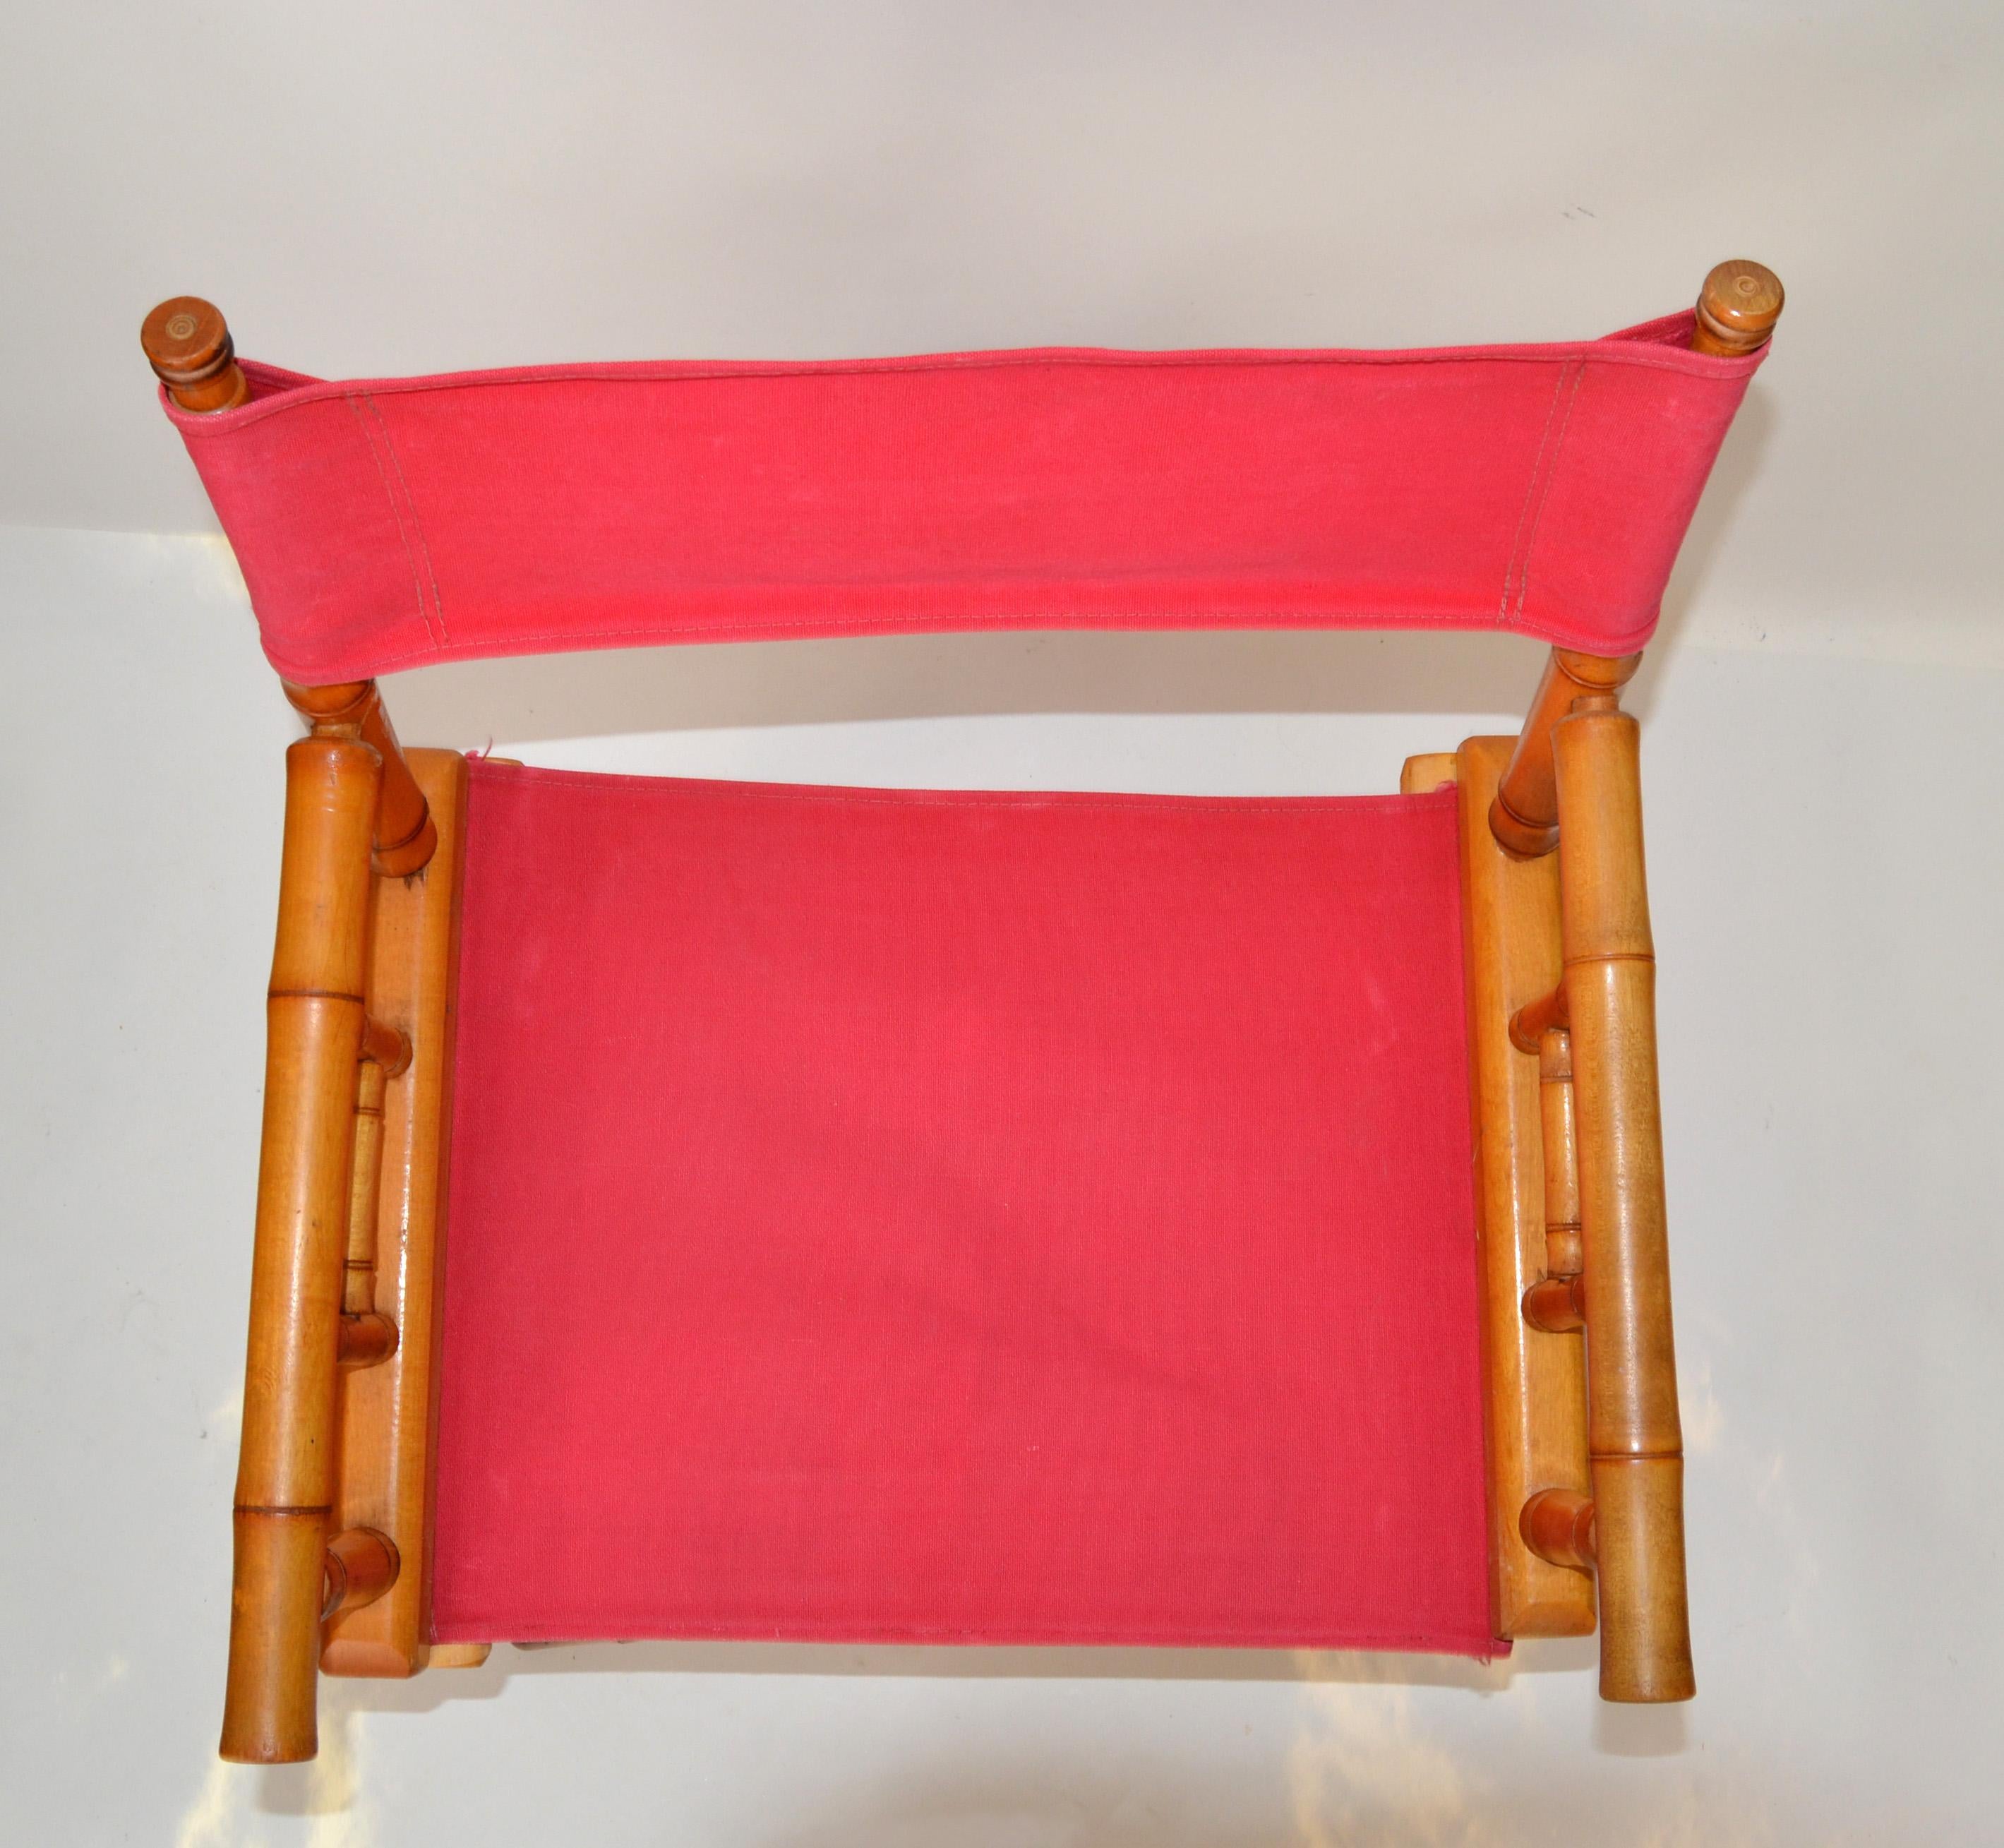 Late 20th Century Directors Chair Bamboo Wood Coral Red Cotton Canvas Fabric Upholstery Foldable  For Sale